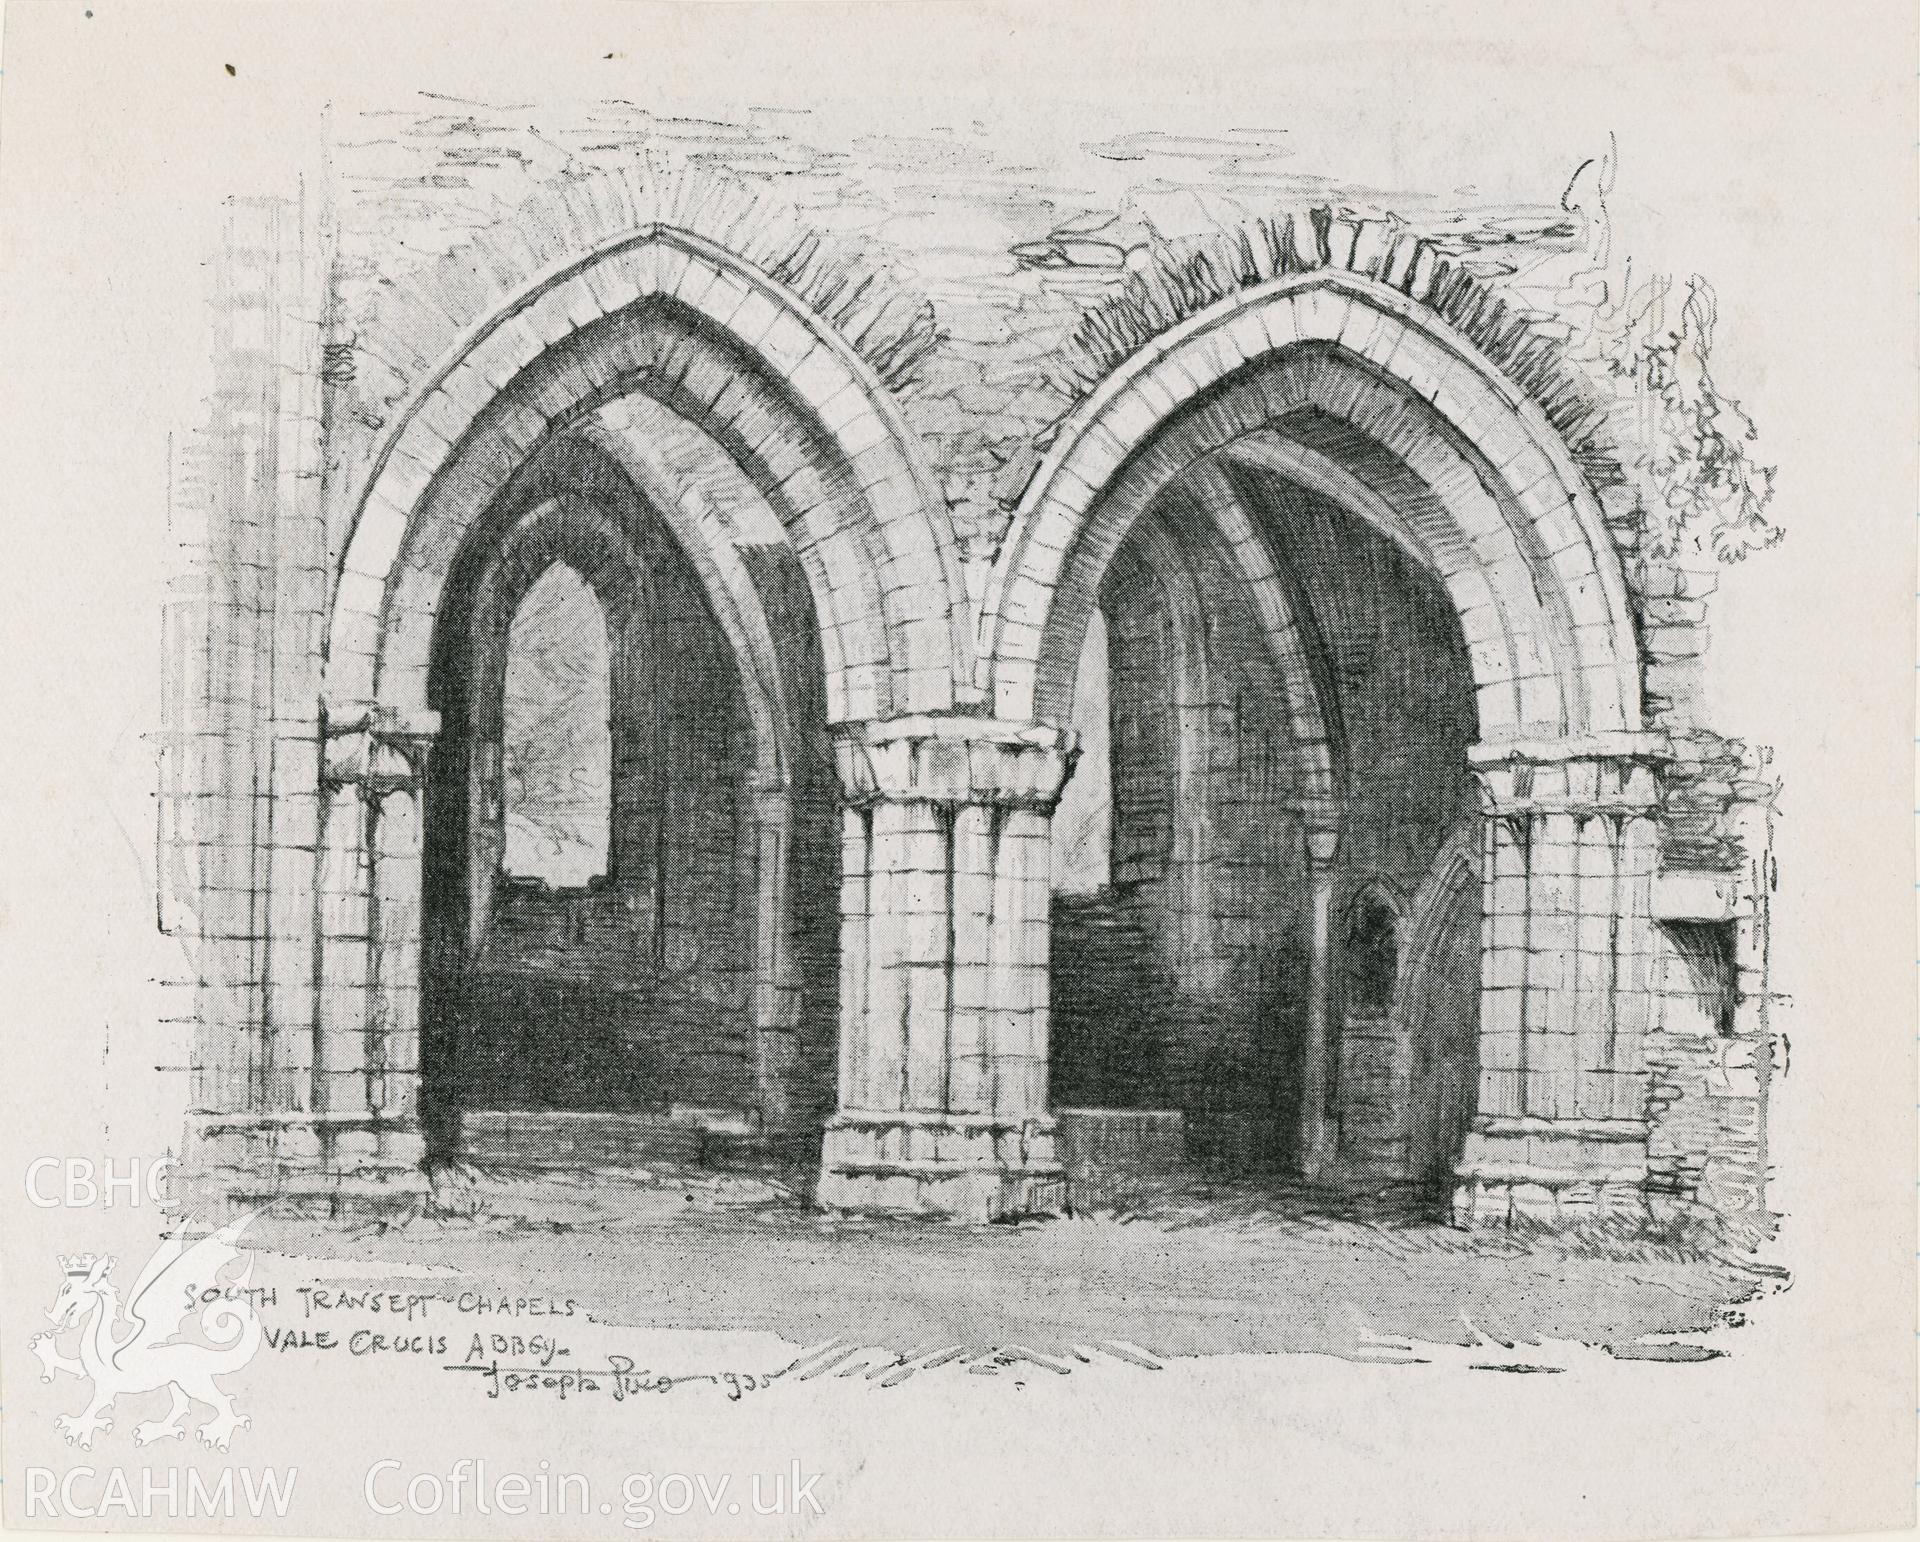 Sketch showing detail of arches at Valle Crucis Abbey.